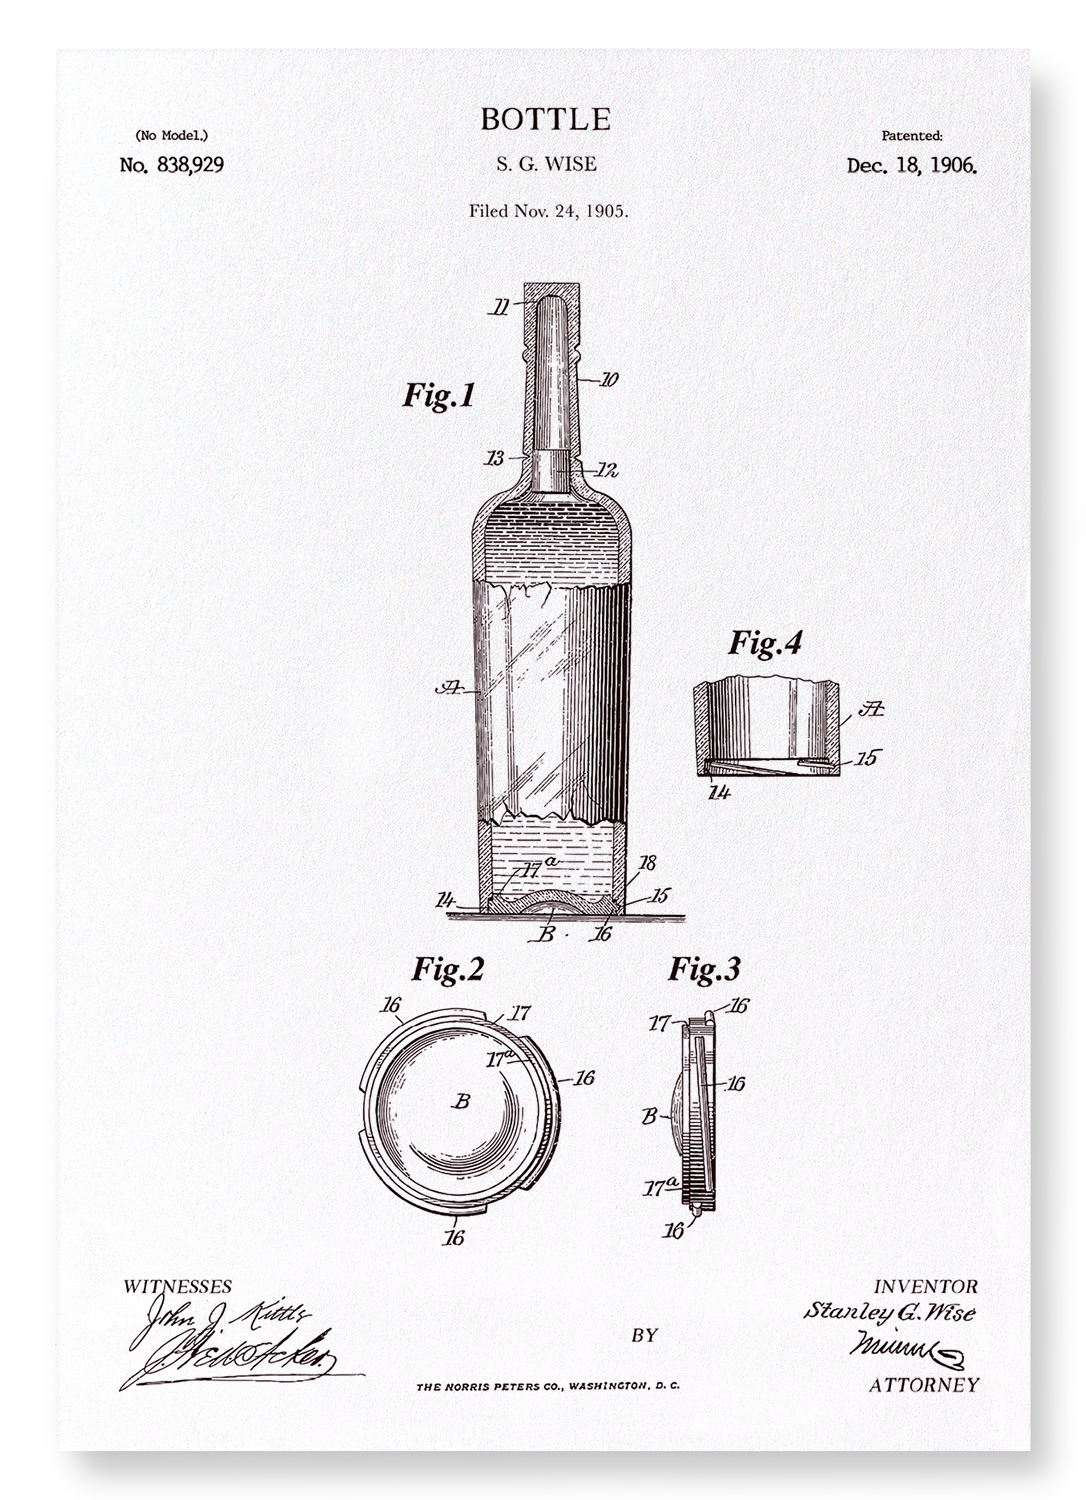 PATENT OF BOTTLE (1906)